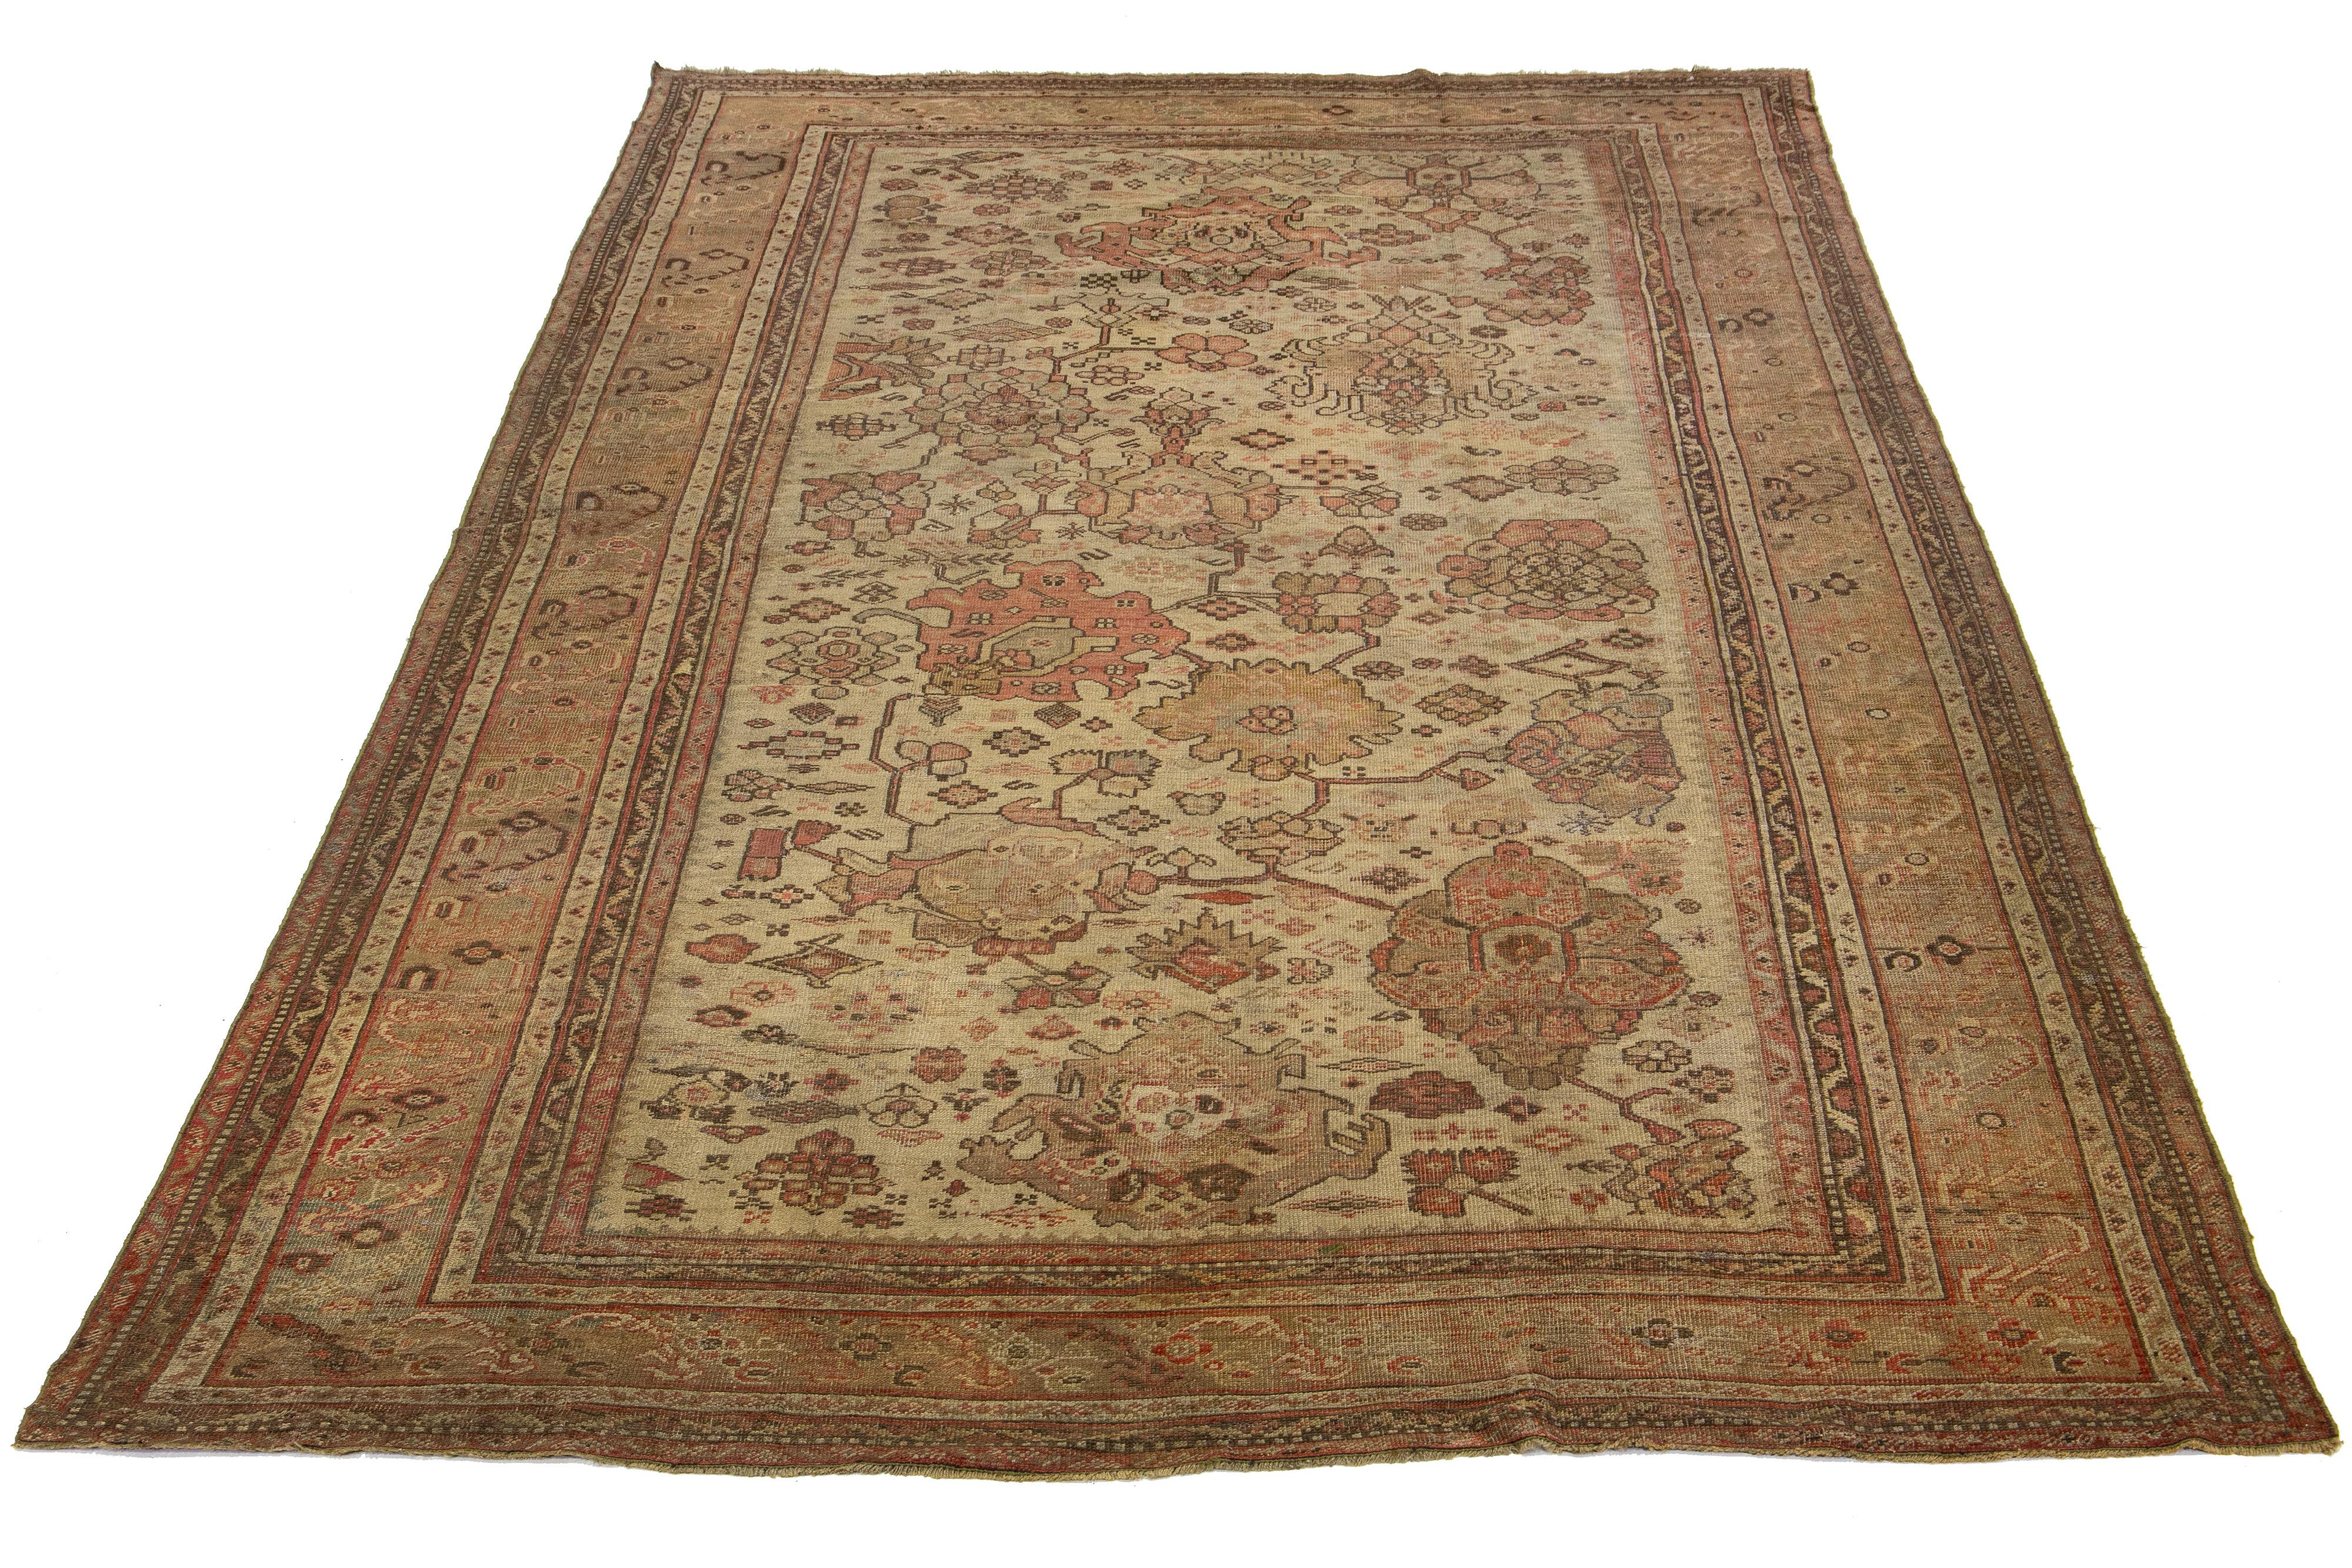 This antique Turkish wool rug from the 19th century features a charming terracotta-colored base and is meticulously hand-knotted with great attention to detail. It showcases stunning tan-golden accents that display a captivating floral